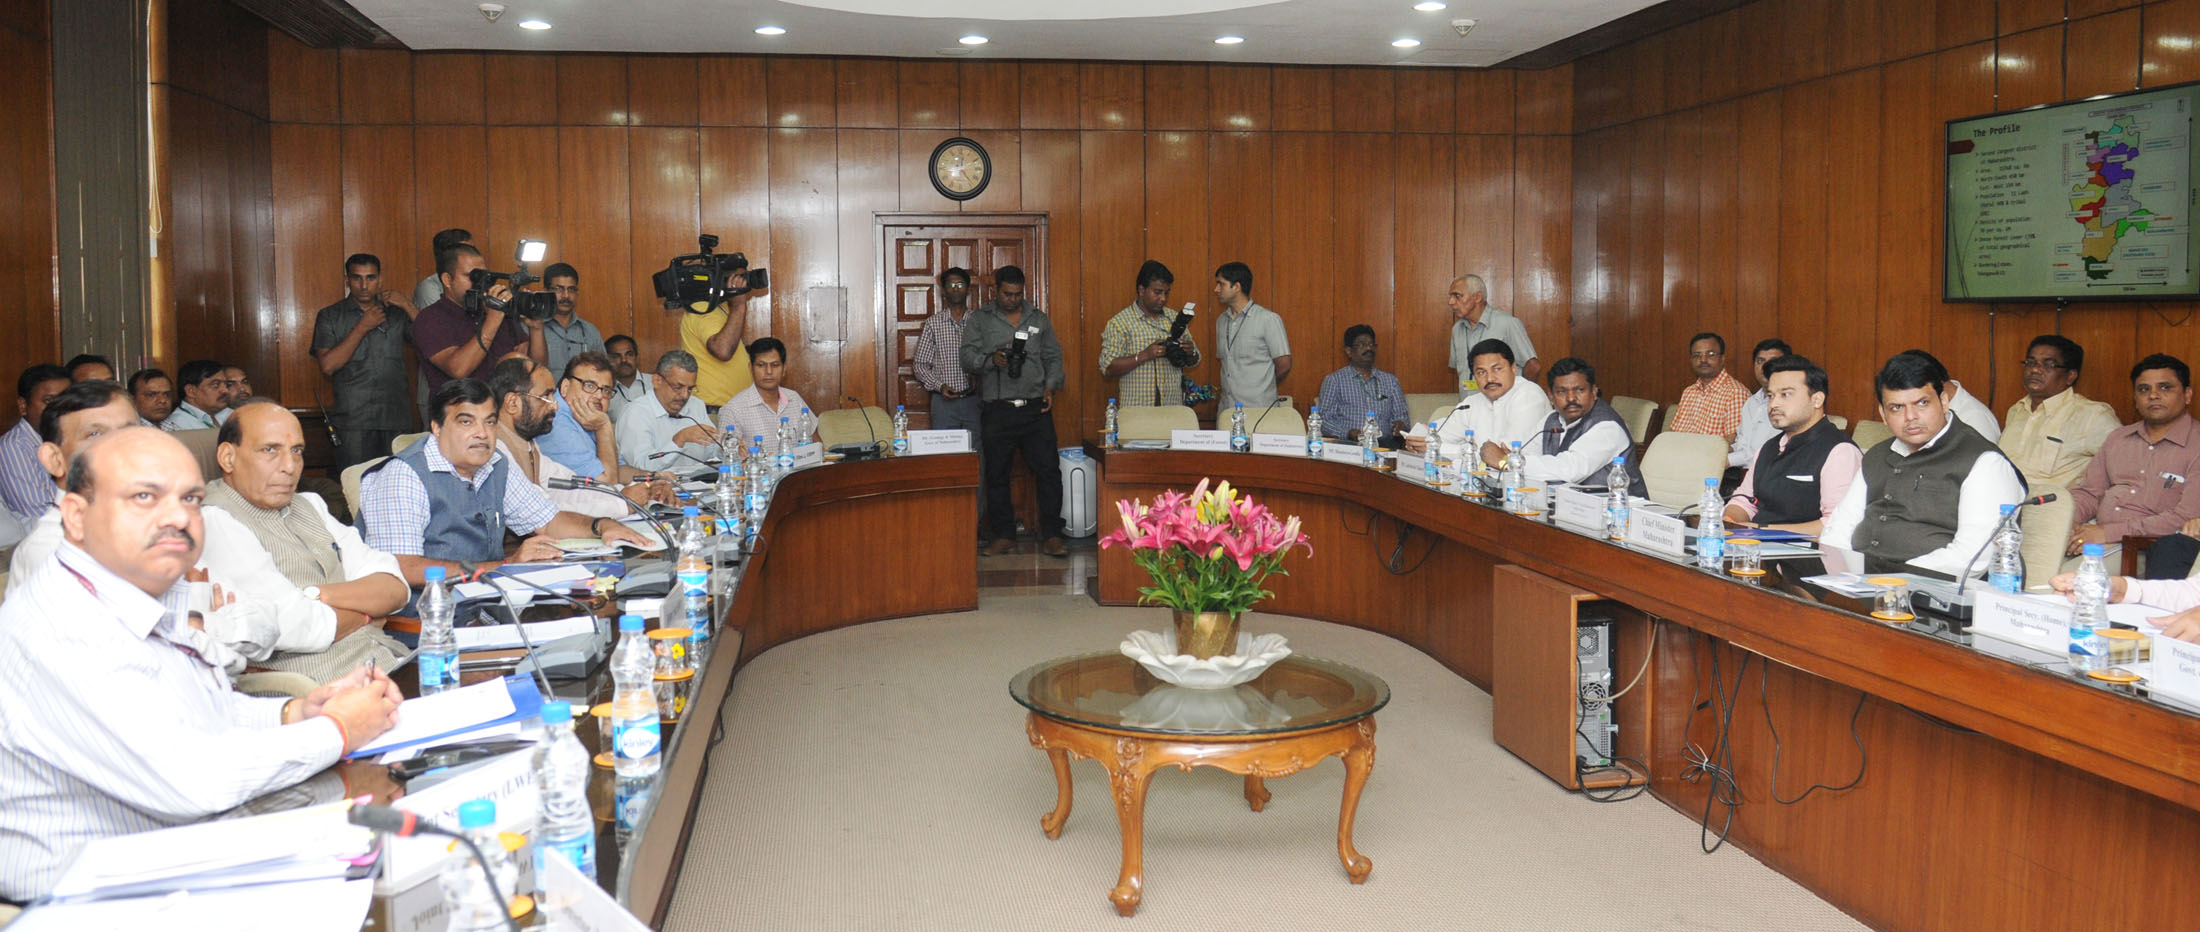 The Union Home Minister, Shri Rajnath Singh chaired a meeting on 'Security arrangement available to various private companies engaged in iron ore and dolomite mining in Gadchiroli and Gondia districts of Maharashtra', in New Delhi on August 27, 2015.  	The Union Minister for Road Transport & Highways and Shipping, Shri Nitin Gadkari, the Chief Minister of Maharashtra, Shri Devendra Fadnavis, the Minister of State for Chemicals & Fertilizers, Shri Hansraj Gangaram Ahir, the Union Home Secretary, Shri L.C. Goyal and Senior Officials of respective Union Ministries are also seen.